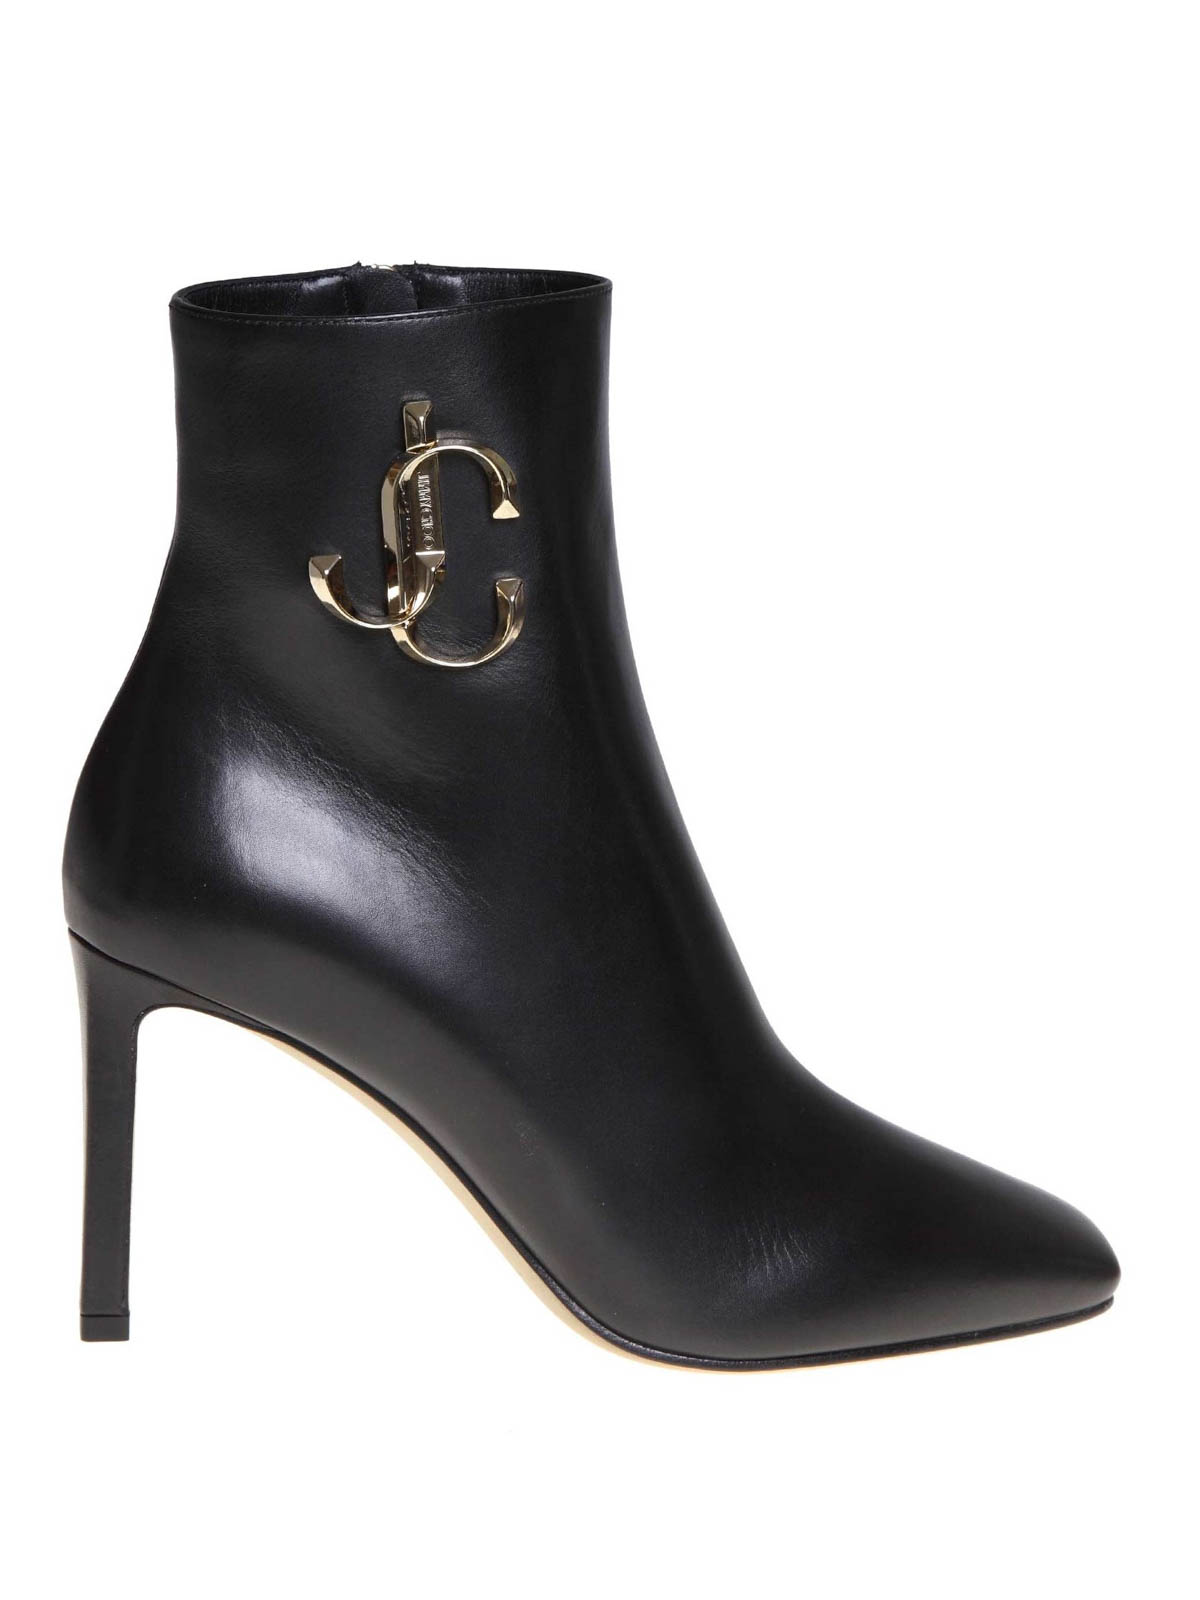 Ankle boots Jimmy Choo - Minori 85 black leather ankle boots 